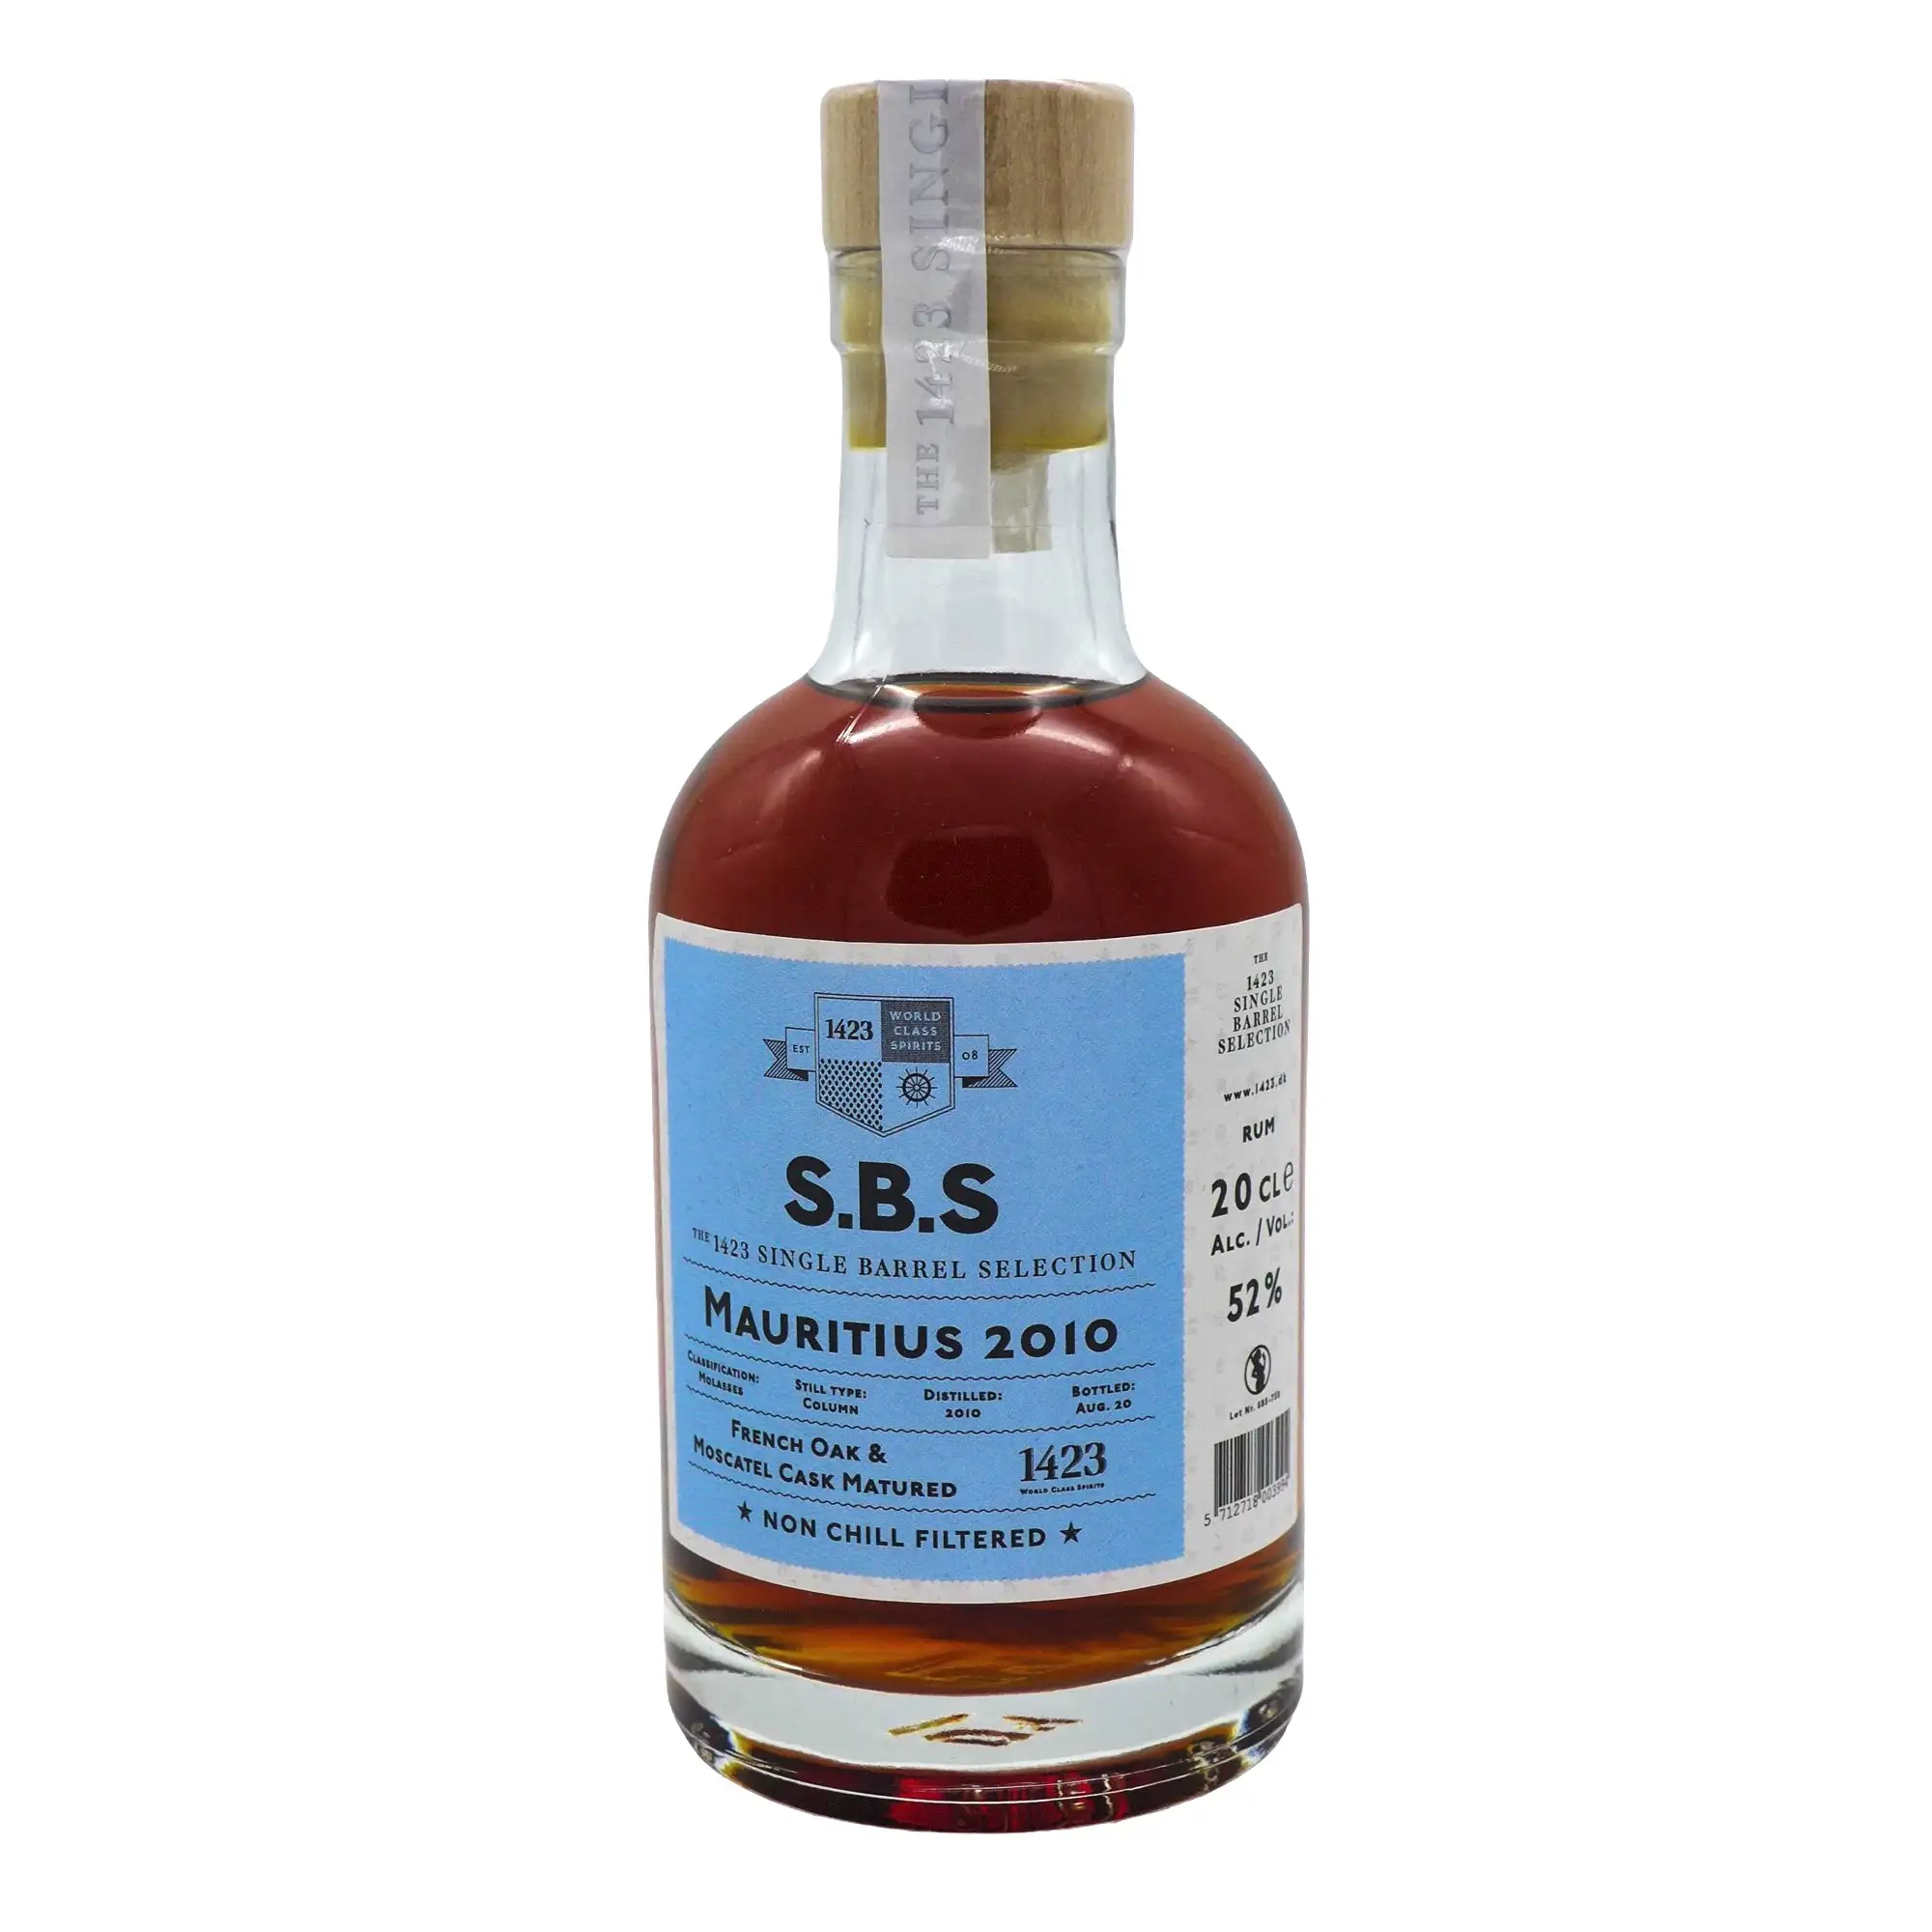 Image of the front of the bottle of the rum S.B.S Mauritius French Oak & Moscatel